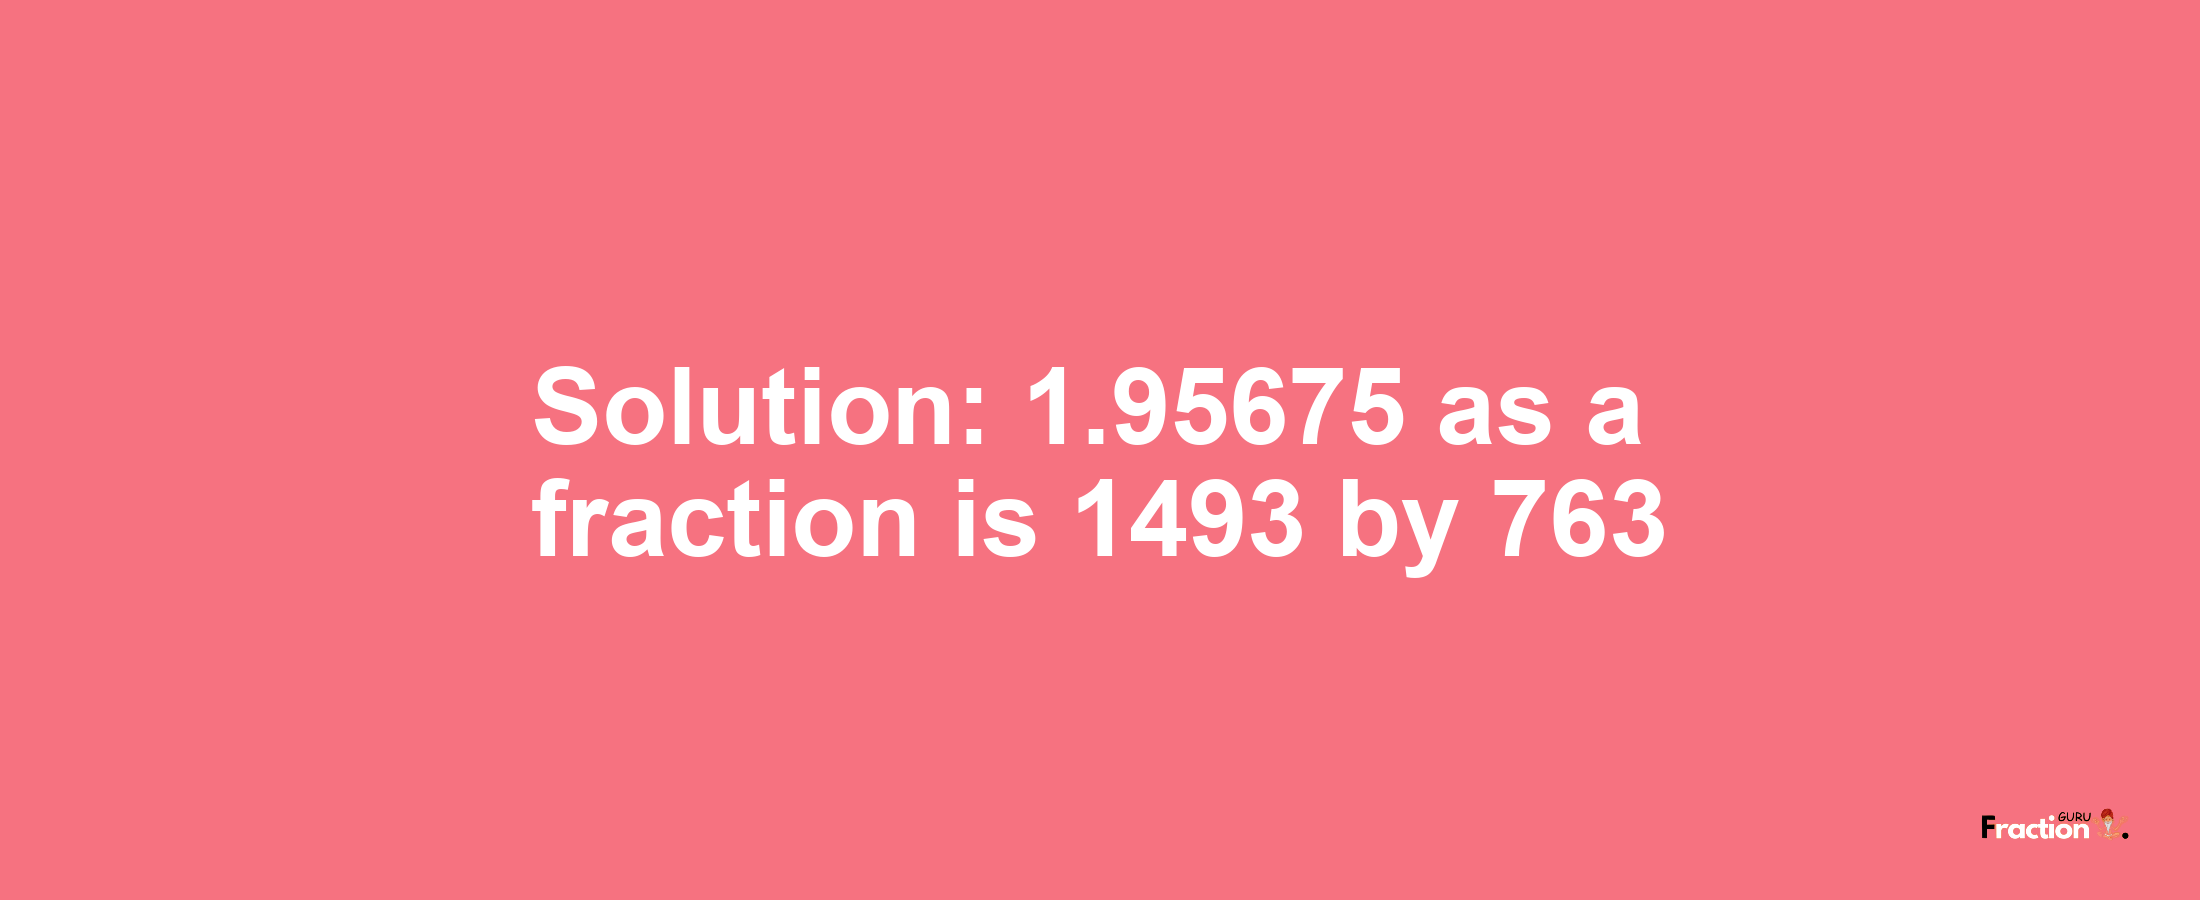 Solution:1.95675 as a fraction is 1493/763